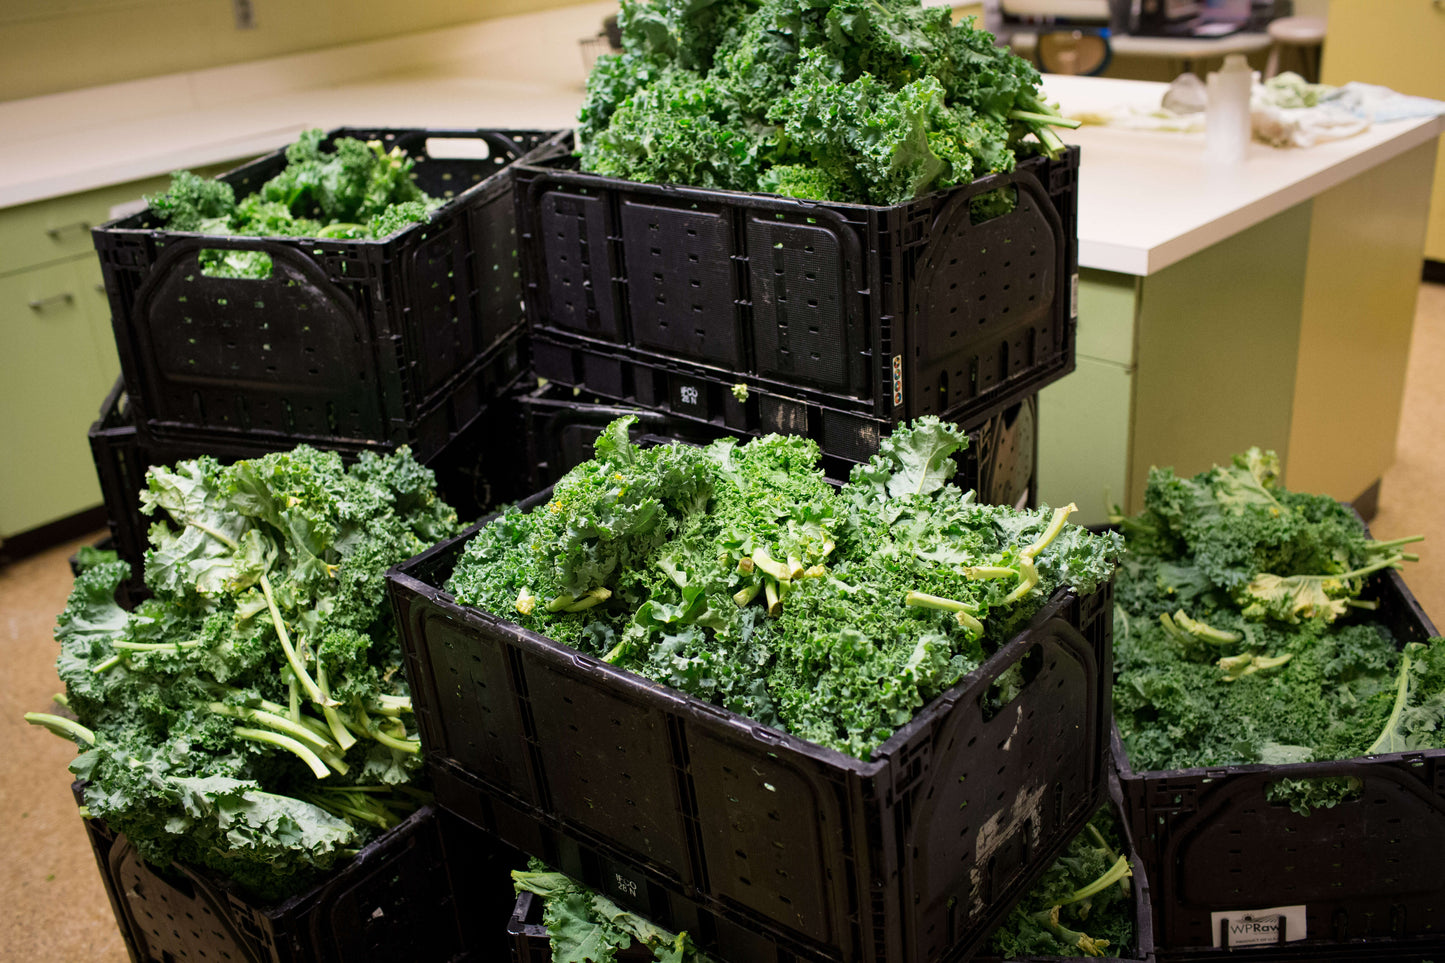 Large shipment of usda certified organic kale in black plastic crates for fruits and vegetables, perfect for bulk purchases.